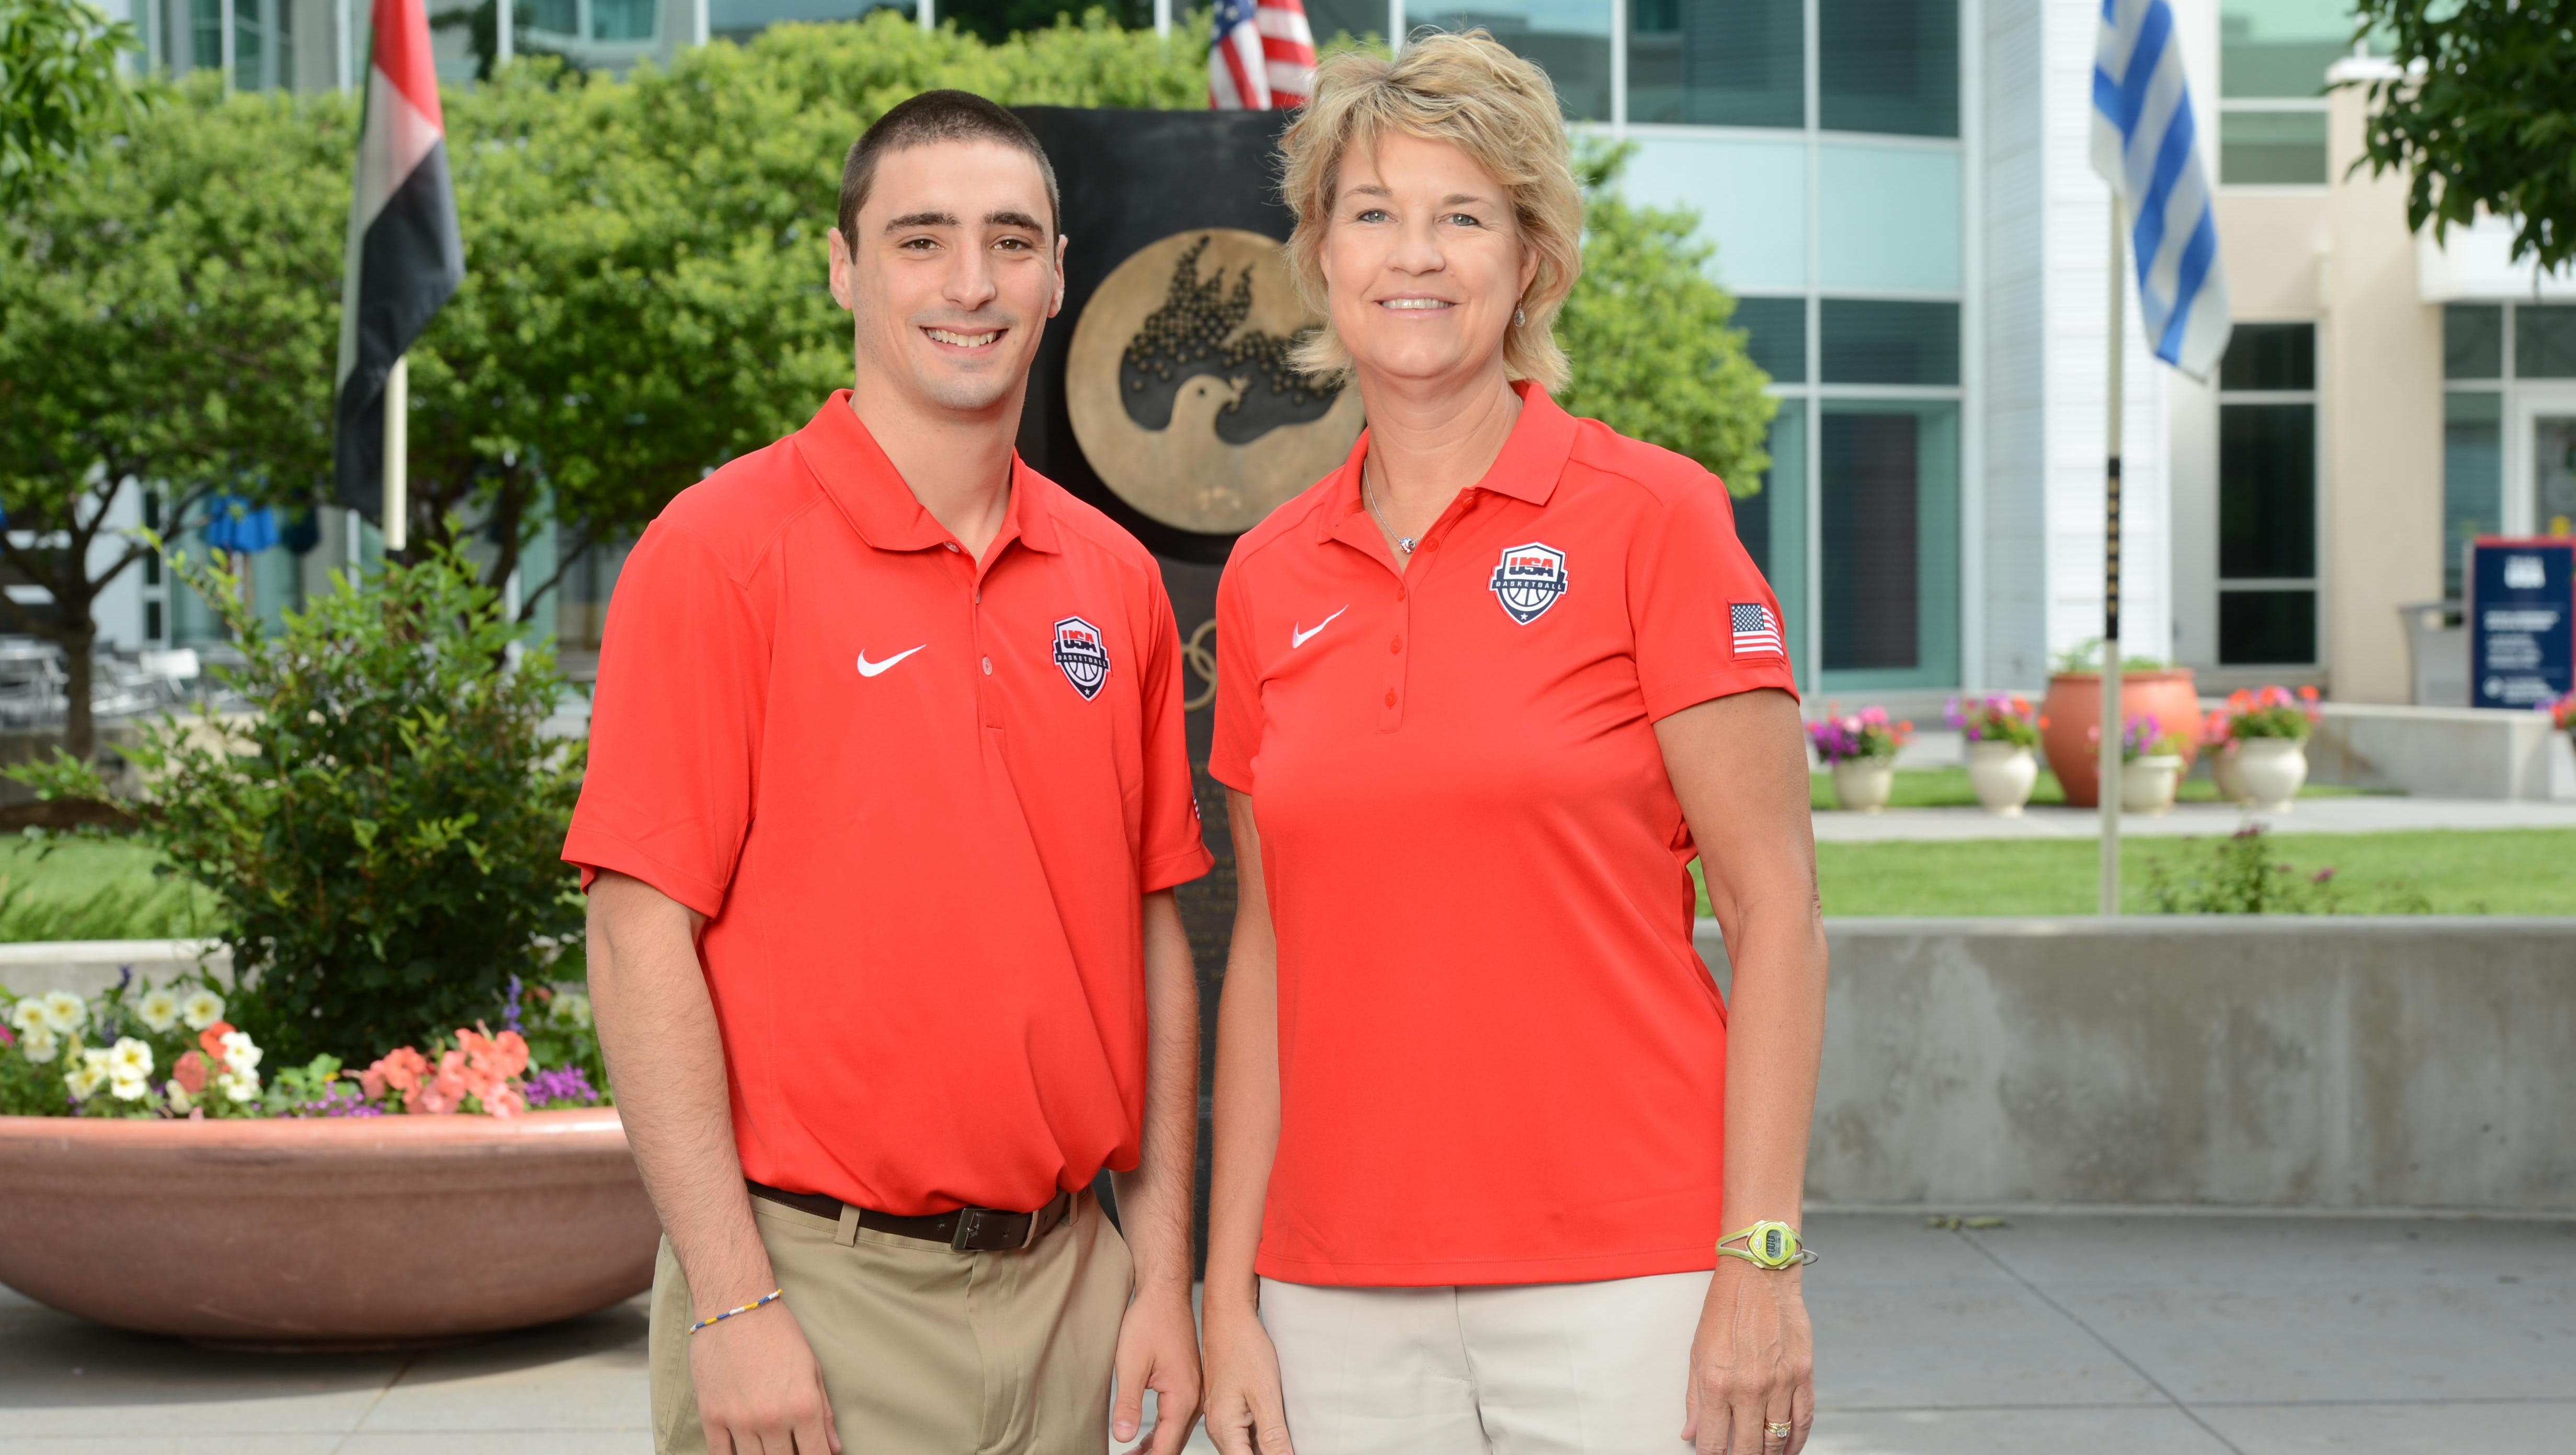 Lisa Bluder, right, helped lead the U.S. women ’ s basketball team at the Pan American Games in 2015.